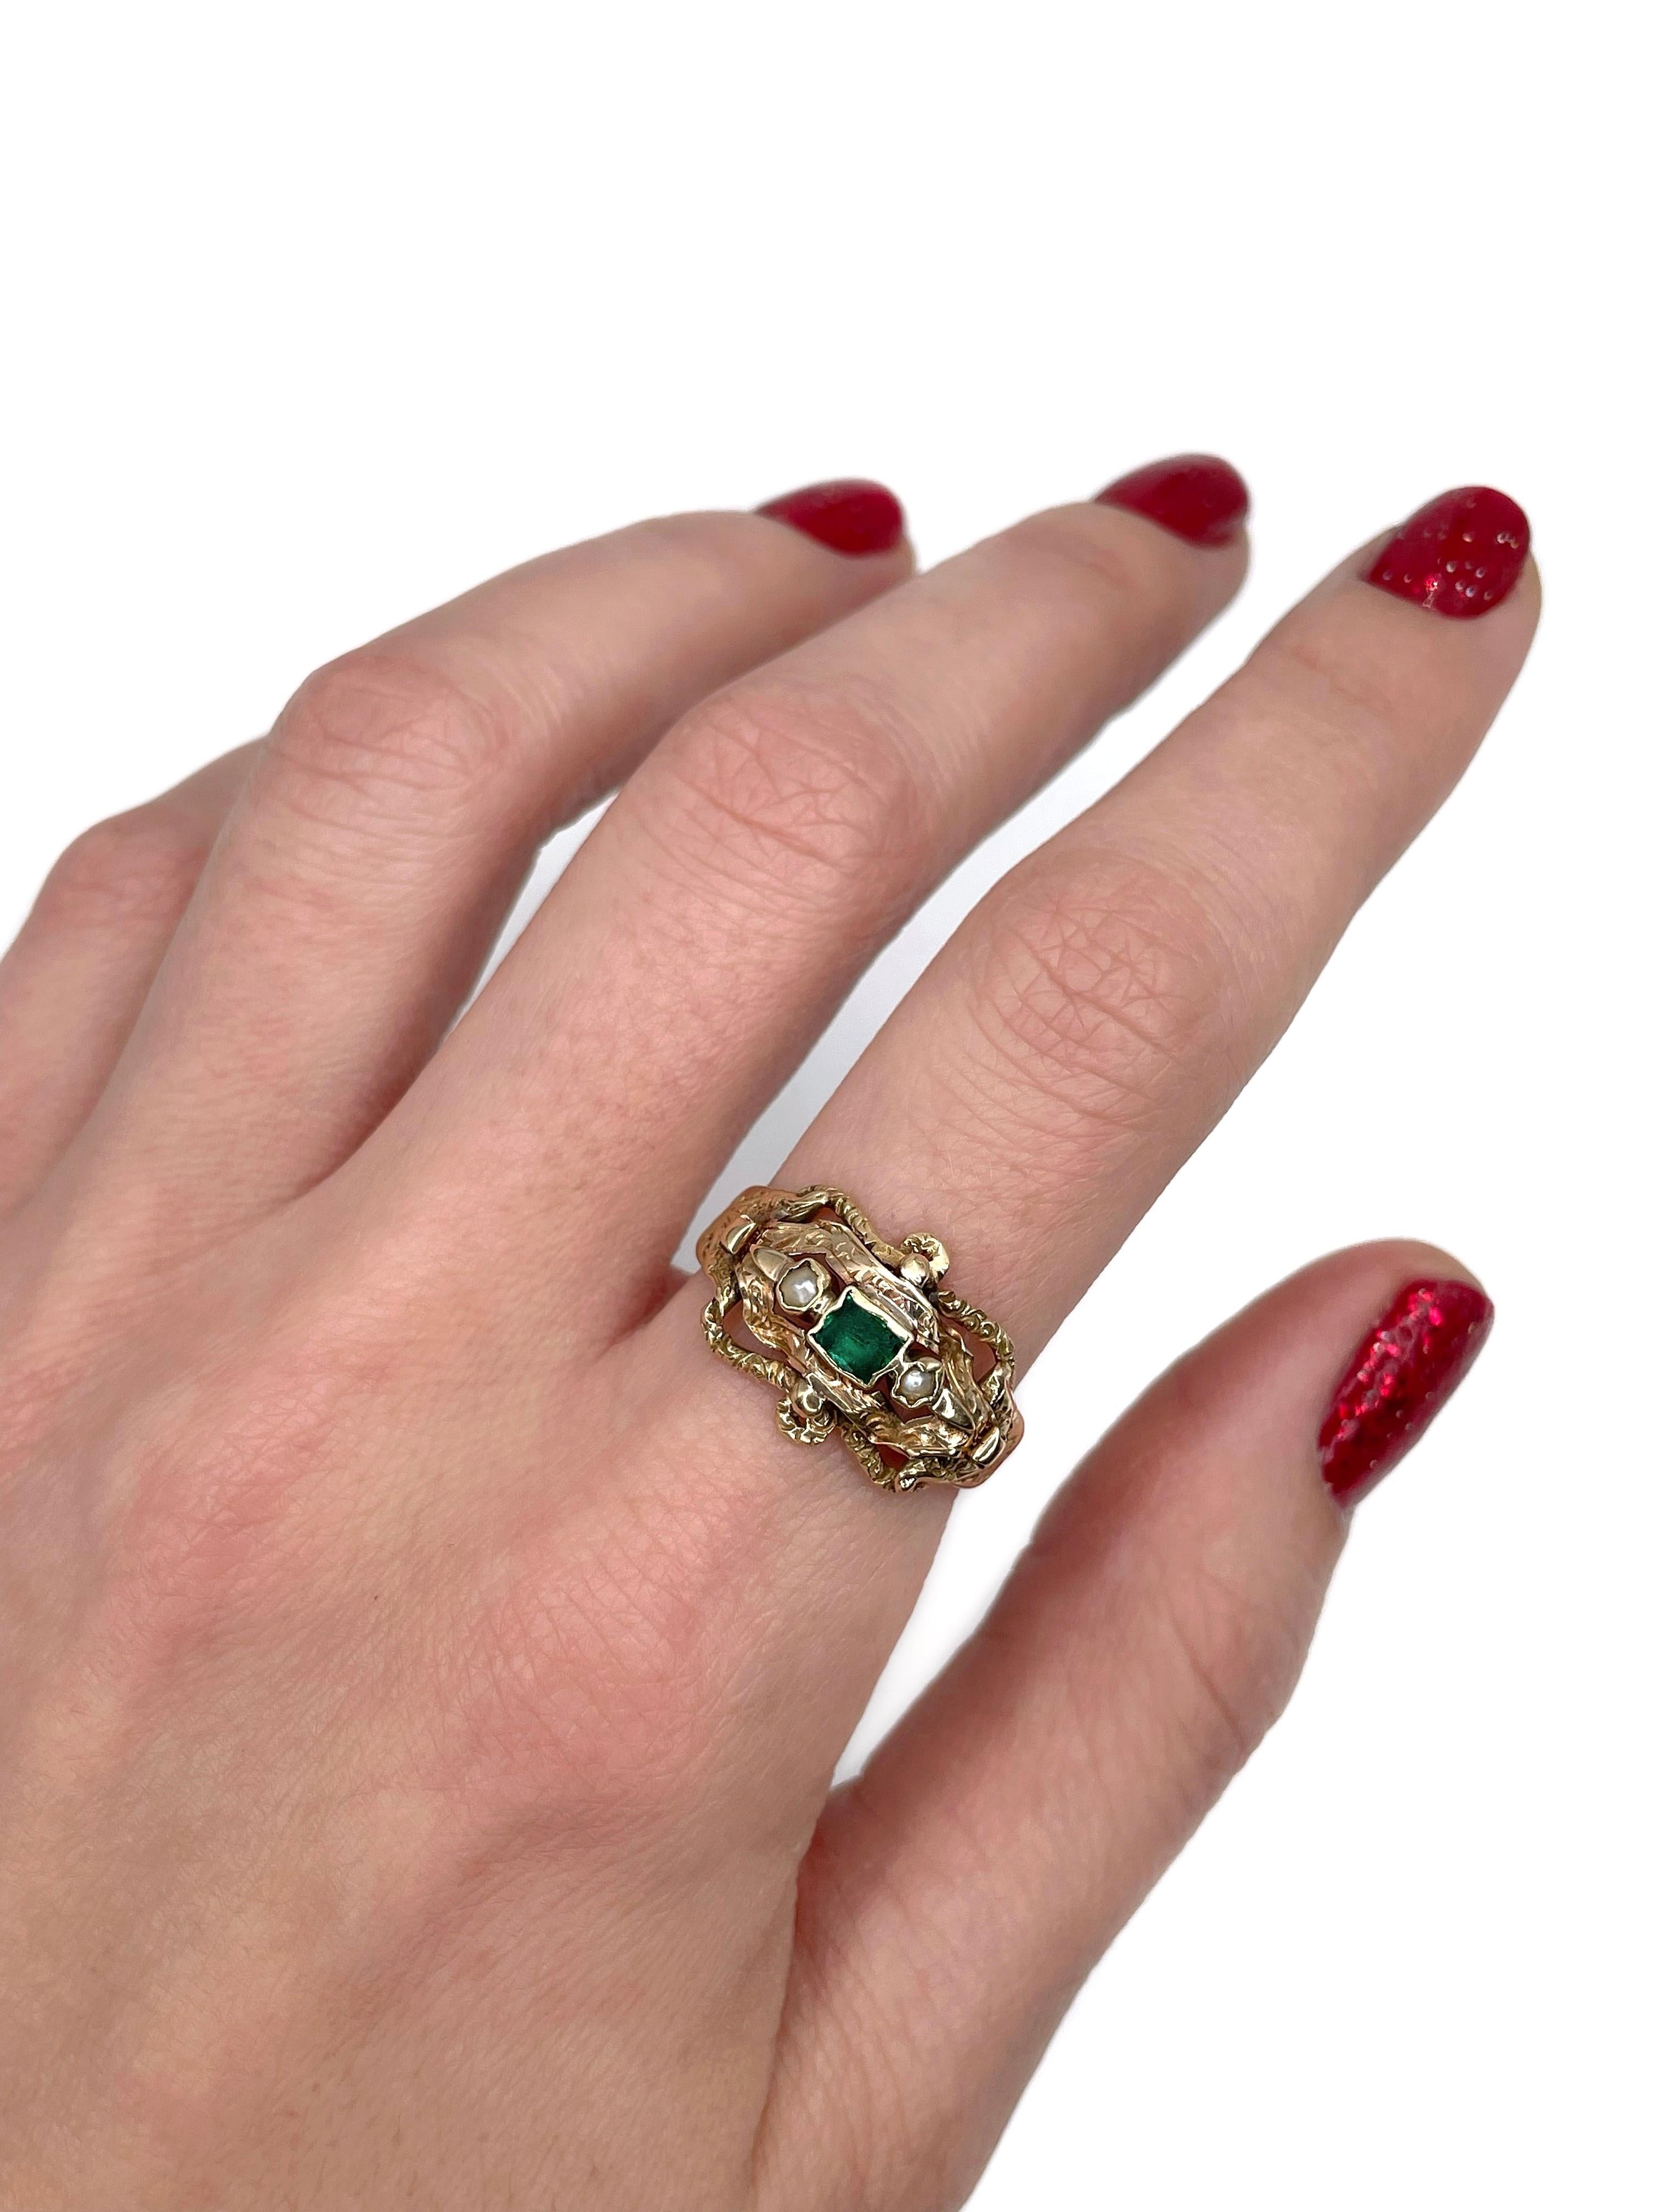 This is a Victorian ring crafted in 18K gold. Circa 1870. 

The piece features 1 emerald and 2 seed pearls. It is highly ornamented. 

Due to its old age the surface of emerald is of average condition.

Weight: 4.04g 
Size: 18.5 (US 8.5)

IMPORTANT: